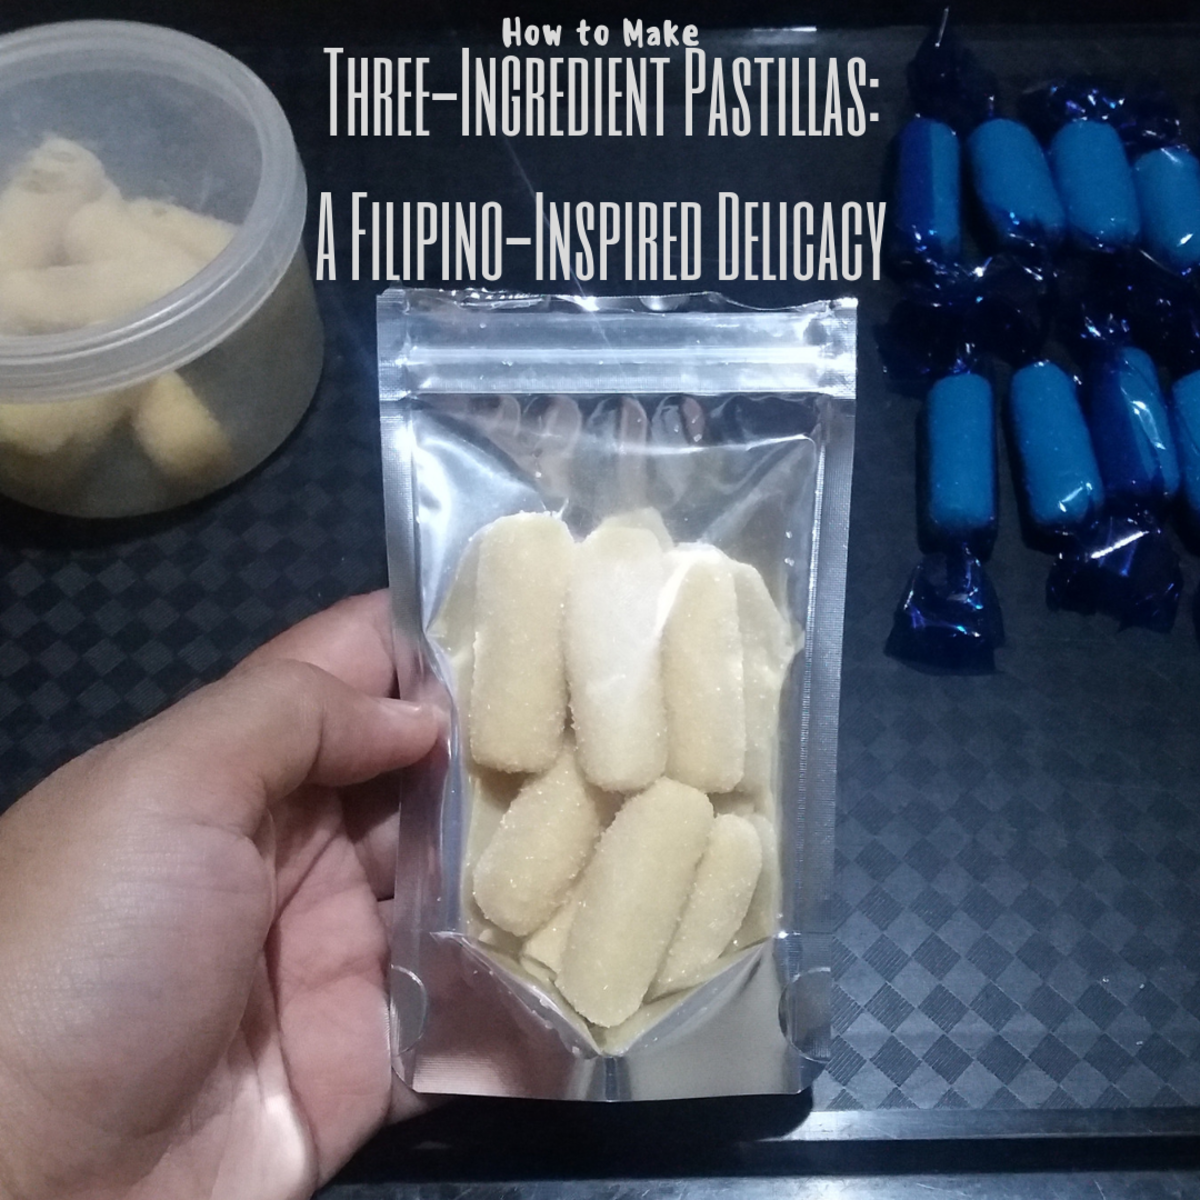 Learn how to make no cook three-ingredient pastillas: a Filipino-inspired delicacy